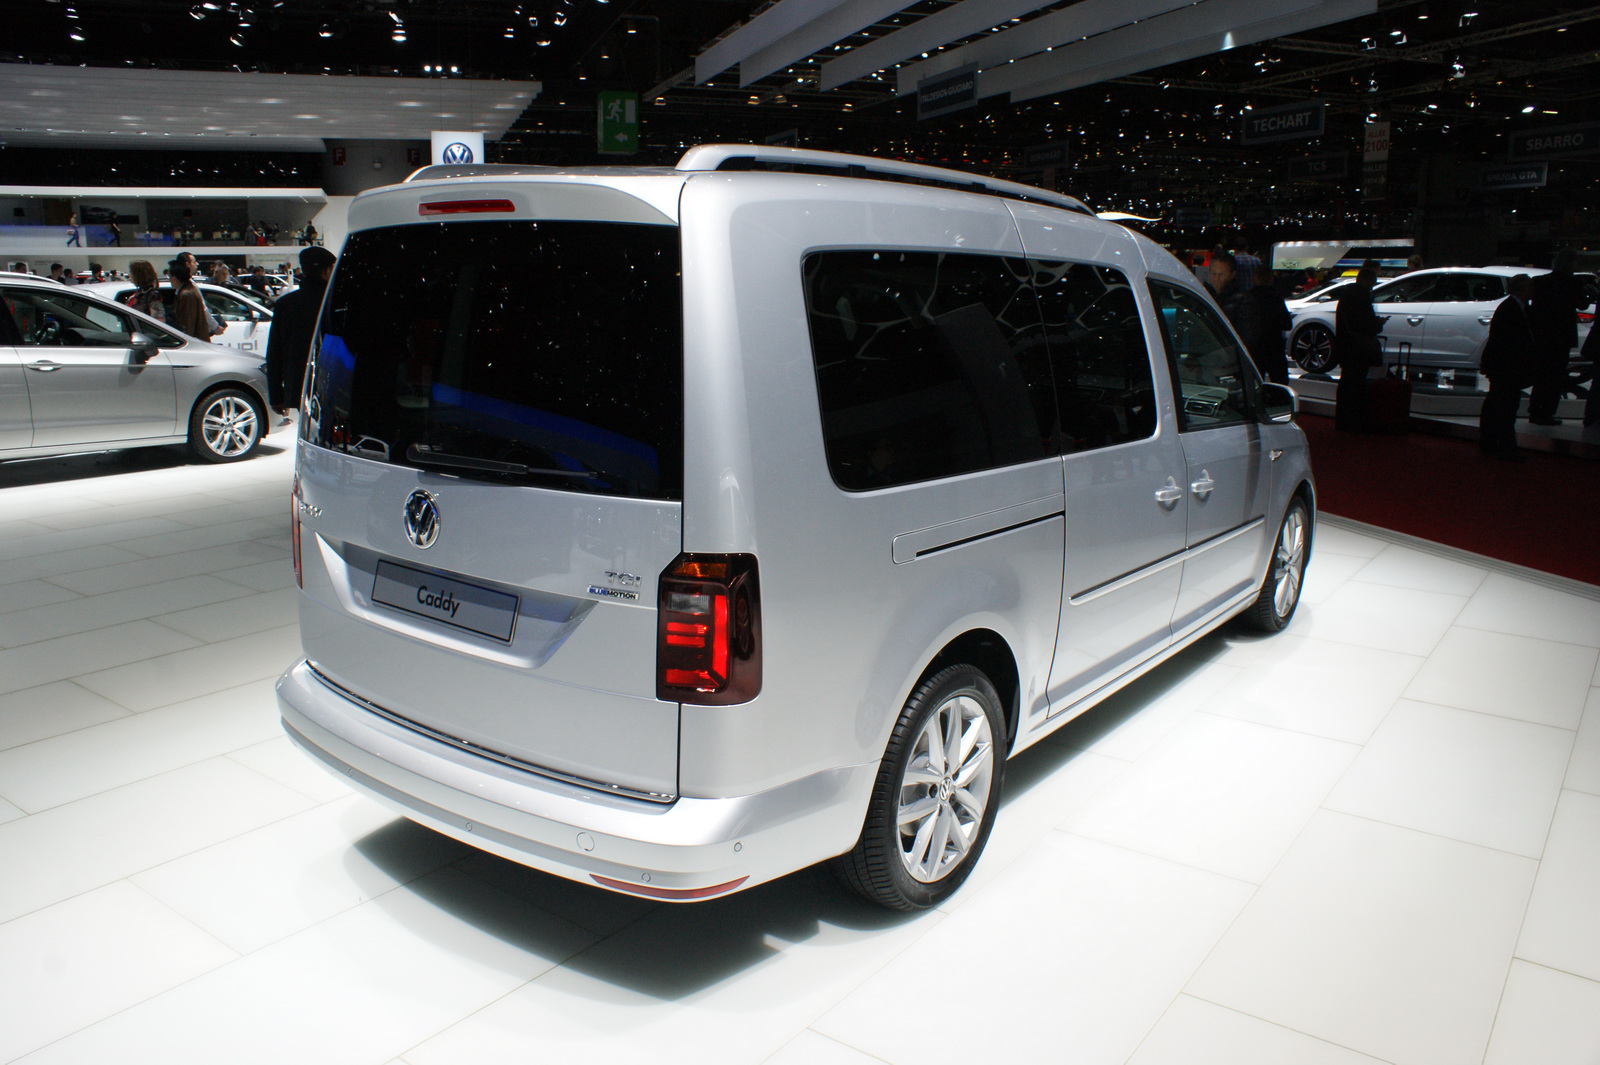 New VW Caddy Maxi Shows its Longer Body in Geneva Carscoops